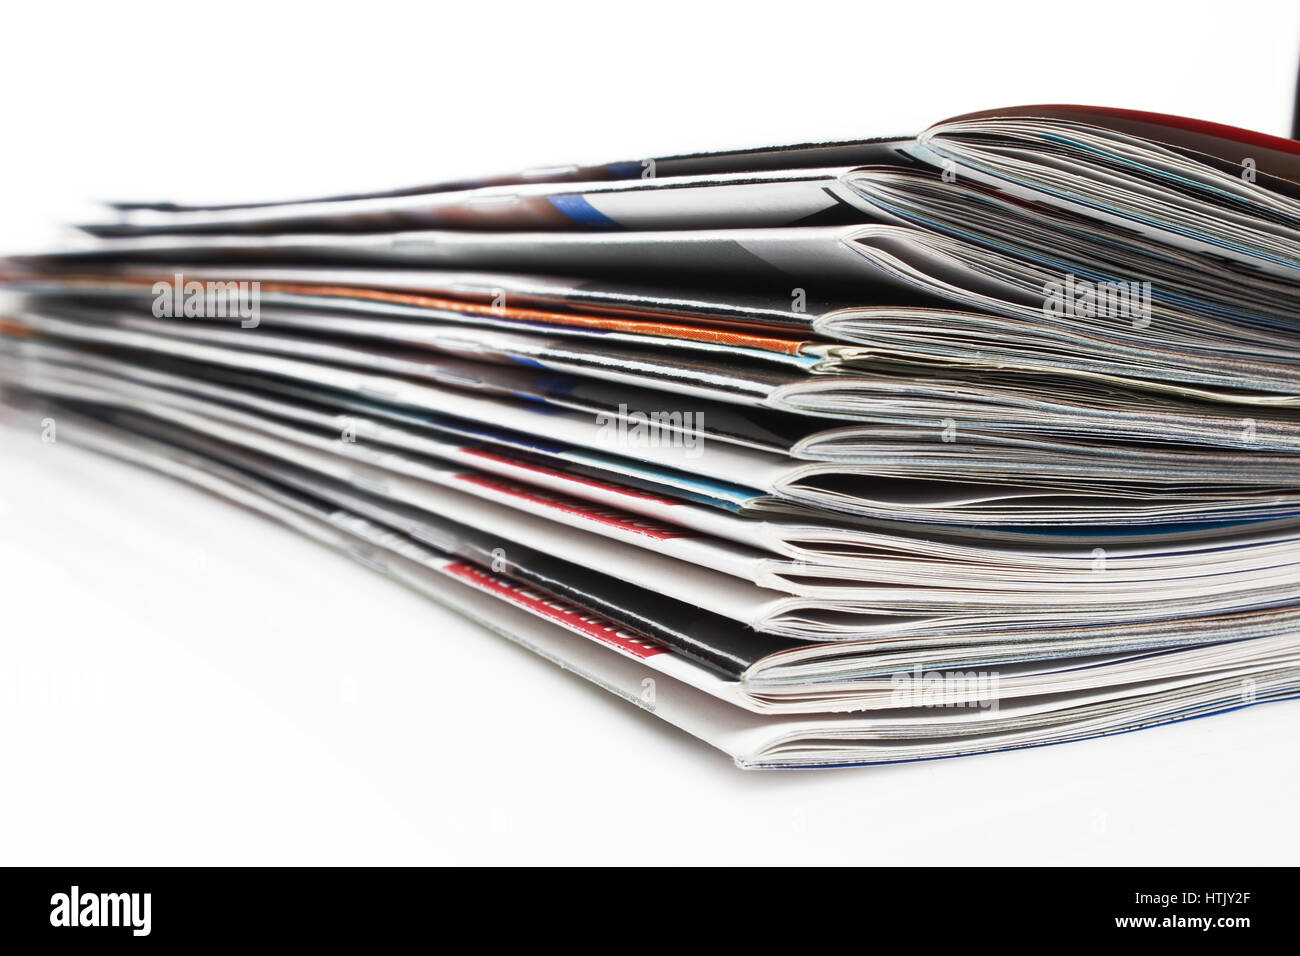 a stack of magazines on white Stock Photo